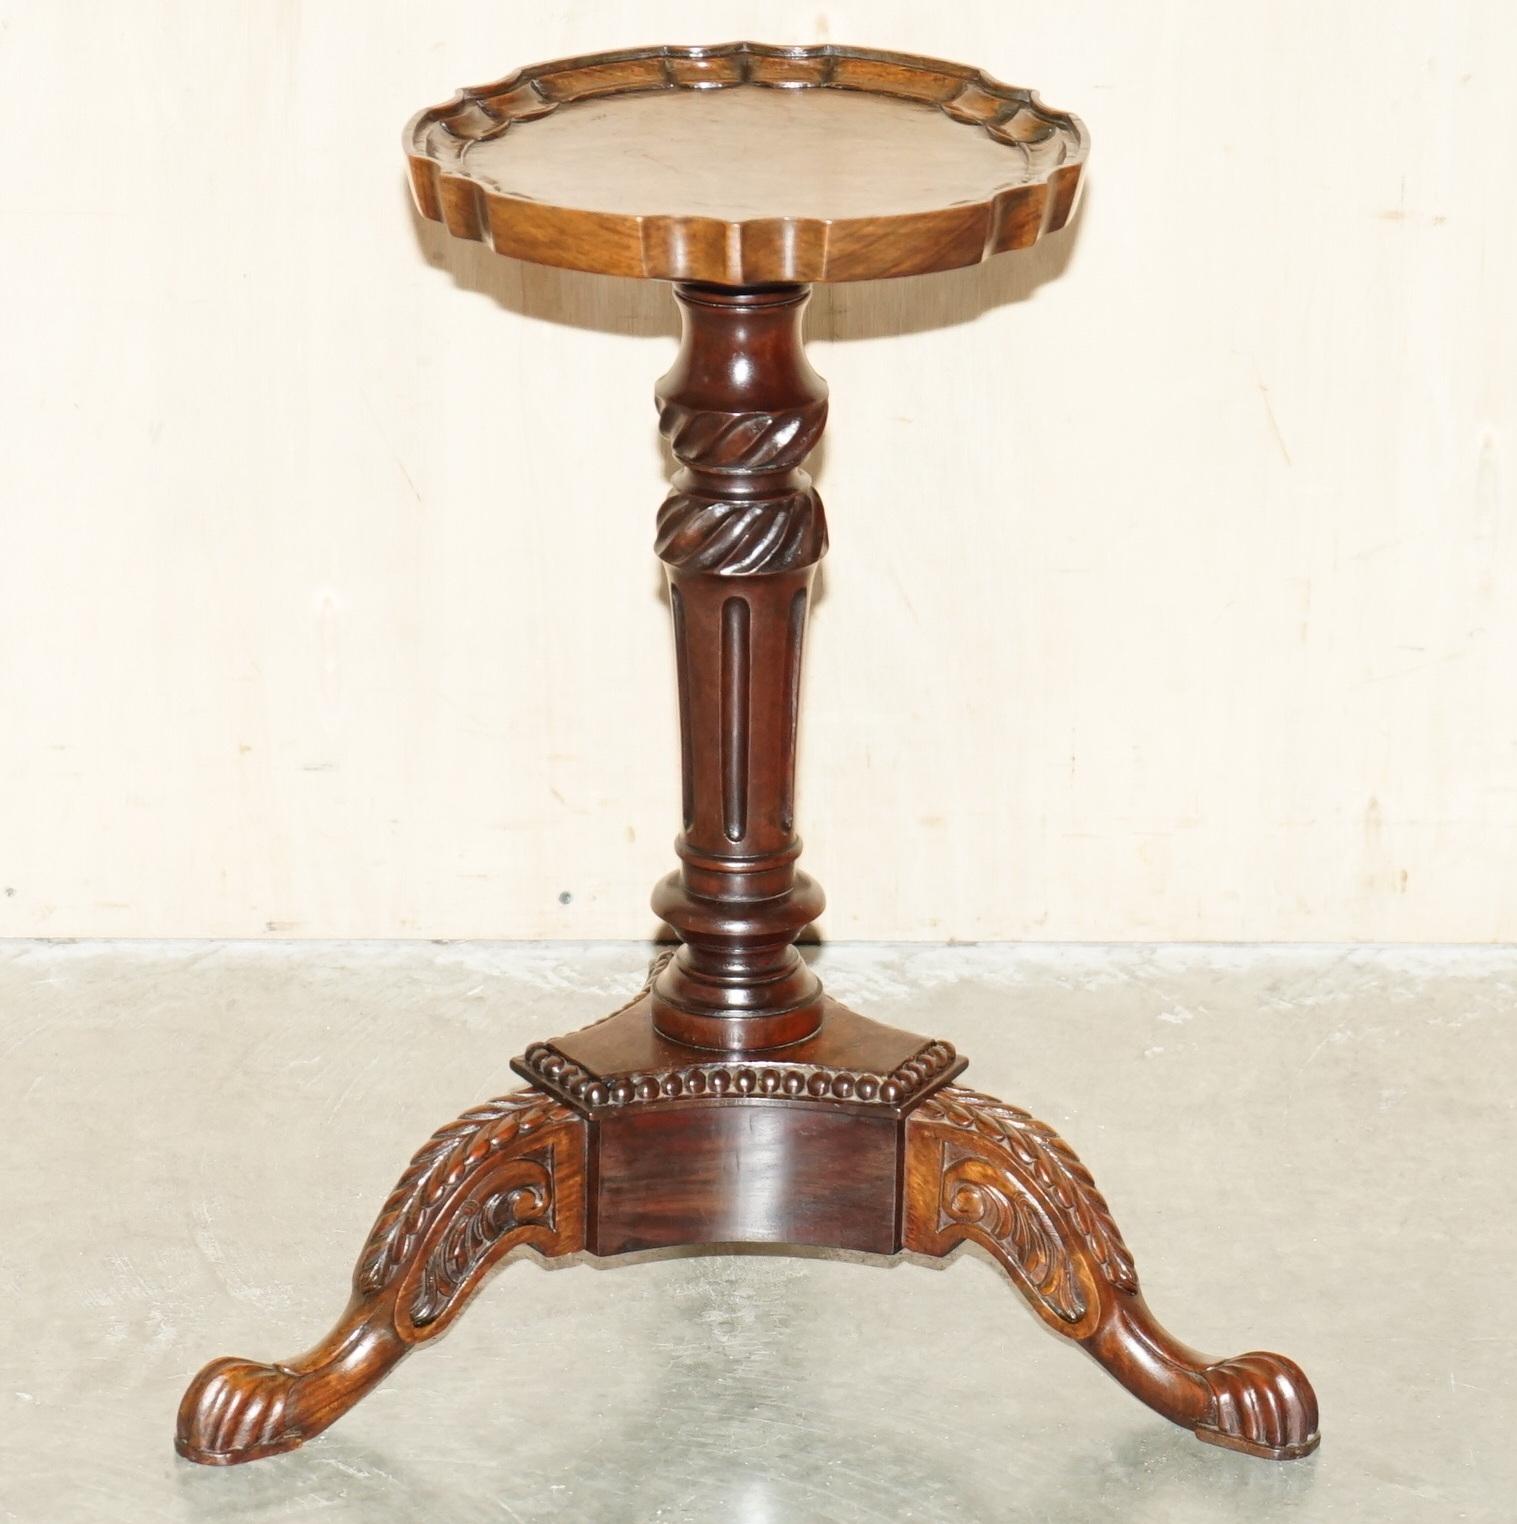 Royal House Antiques

Royal House Antiques is delighted to offer for sale this very fine antique Circa 1950-1960 Thomas Chippendale taste, Mahogany pie crust edge Kettle stand or tripod table 

Please note the delivery fee listed is just a guide, it